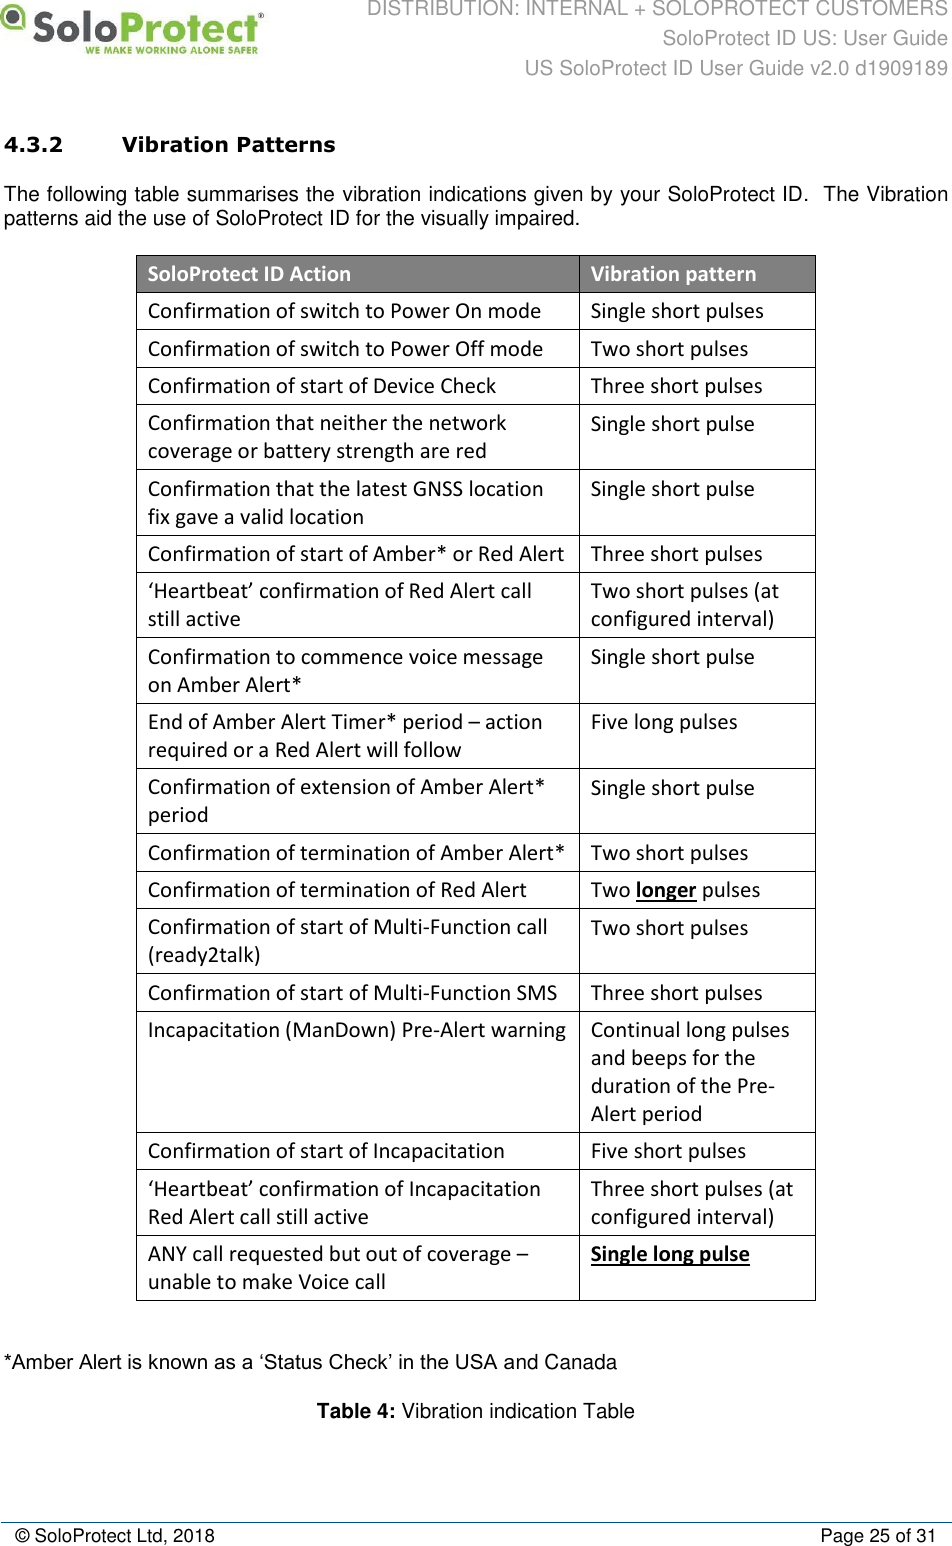 DISTRIBUTION: INTERNAL + SOLOPROTECT CUSTOMERS SoloProtect ID US: User Guide US SoloProtect ID User Guide v2.0 d1909189  © SoloProtect Ltd, 2018  Page 25 of 31 4.3.2 Vibration Patterns The following table summarises the vibration indications given by your SoloProtect ID.  The Vibration patterns aid the use of SoloProtect ID for the visually impaired. SoloProtect ID Action Vibration pattern Confirmation of switch to Power On mode Single short pulses Confirmation of switch to Power Off mode Two short pulses Confirmation of start of Device Check  Three short pulses Confirmation that neither the network coverage or battery strength are red Single short pulse Confirmation that the latest GNSS location fix gave a valid location Single short pulse Confirmation of start of Amber* or Red Alert Three short pulses ‘Heartbeat’ confirmation of Red Alert call still active Two short pulses (at configured interval) Confirmation to commence voice message on Amber Alert*  Single short pulse End of Amber Alert Timer* period – action required or a Red Alert will follow Five long pulses Confirmation of extension of Amber Alert* period Single short pulse Confirmation of termination of Amber Alert* Two short pulses Confirmation of termination of Red Alert Two longer pulses Confirmation of start of Multi-Function call (ready2talk) Two short pulses Confirmation of start of Multi-Function SMS  Three short pulses Incapacitation (ManDown) Pre-Alert warning Continual long pulses and beeps for the duration of the Pre-Alert period Confirmation of start of Incapacitation Five short pulses ‘Heartbeat’ confirmation of Incapacitation Red Alert call still active Three short pulses (at configured interval) ANY call requested but out of coverage – unable to make Voice call Single long pulse  *Amber Alert is known as a ‘Status Check’ in the USA and Canada Table 4: Vibration indication Table  